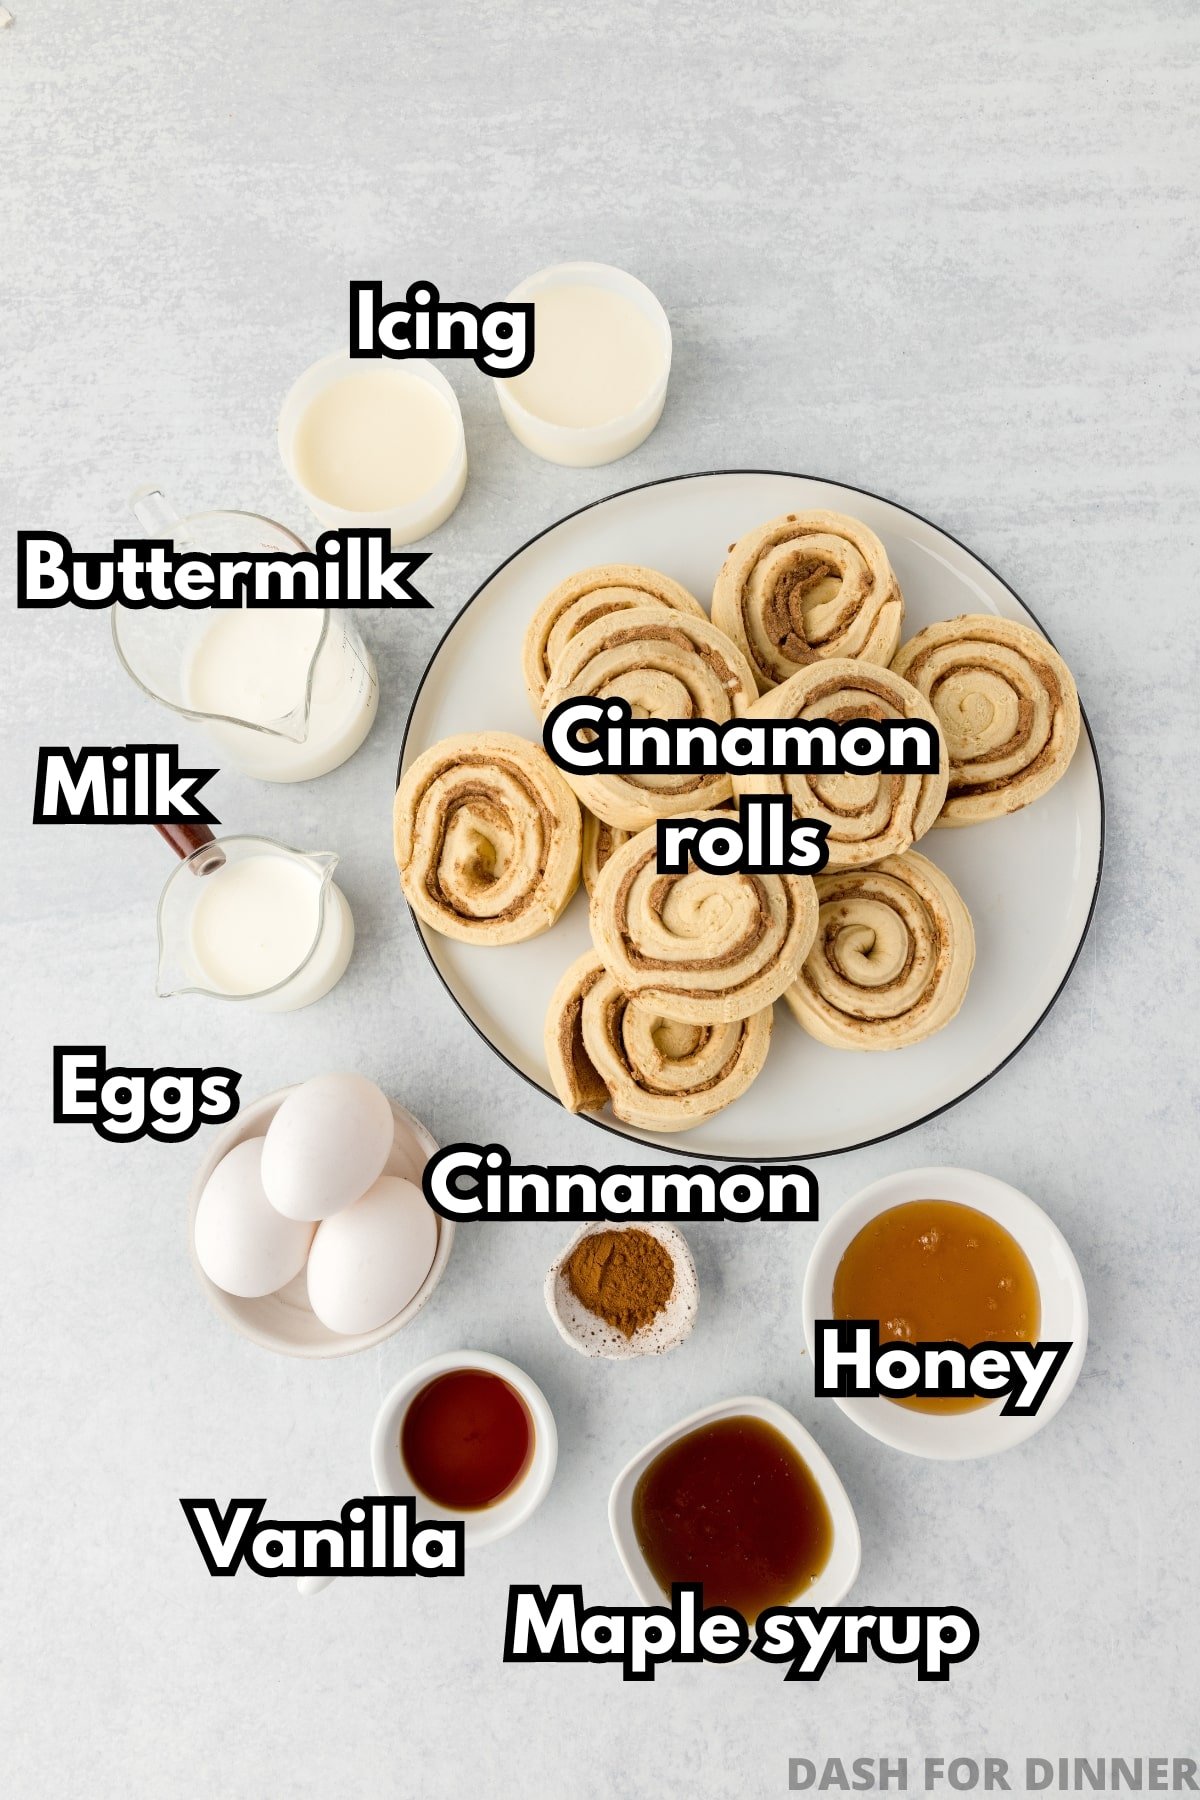 The ingredients needed to make cinnamon roll casserole: refrigerated rolls, maple syrup, honey, milk, eggs, etc.